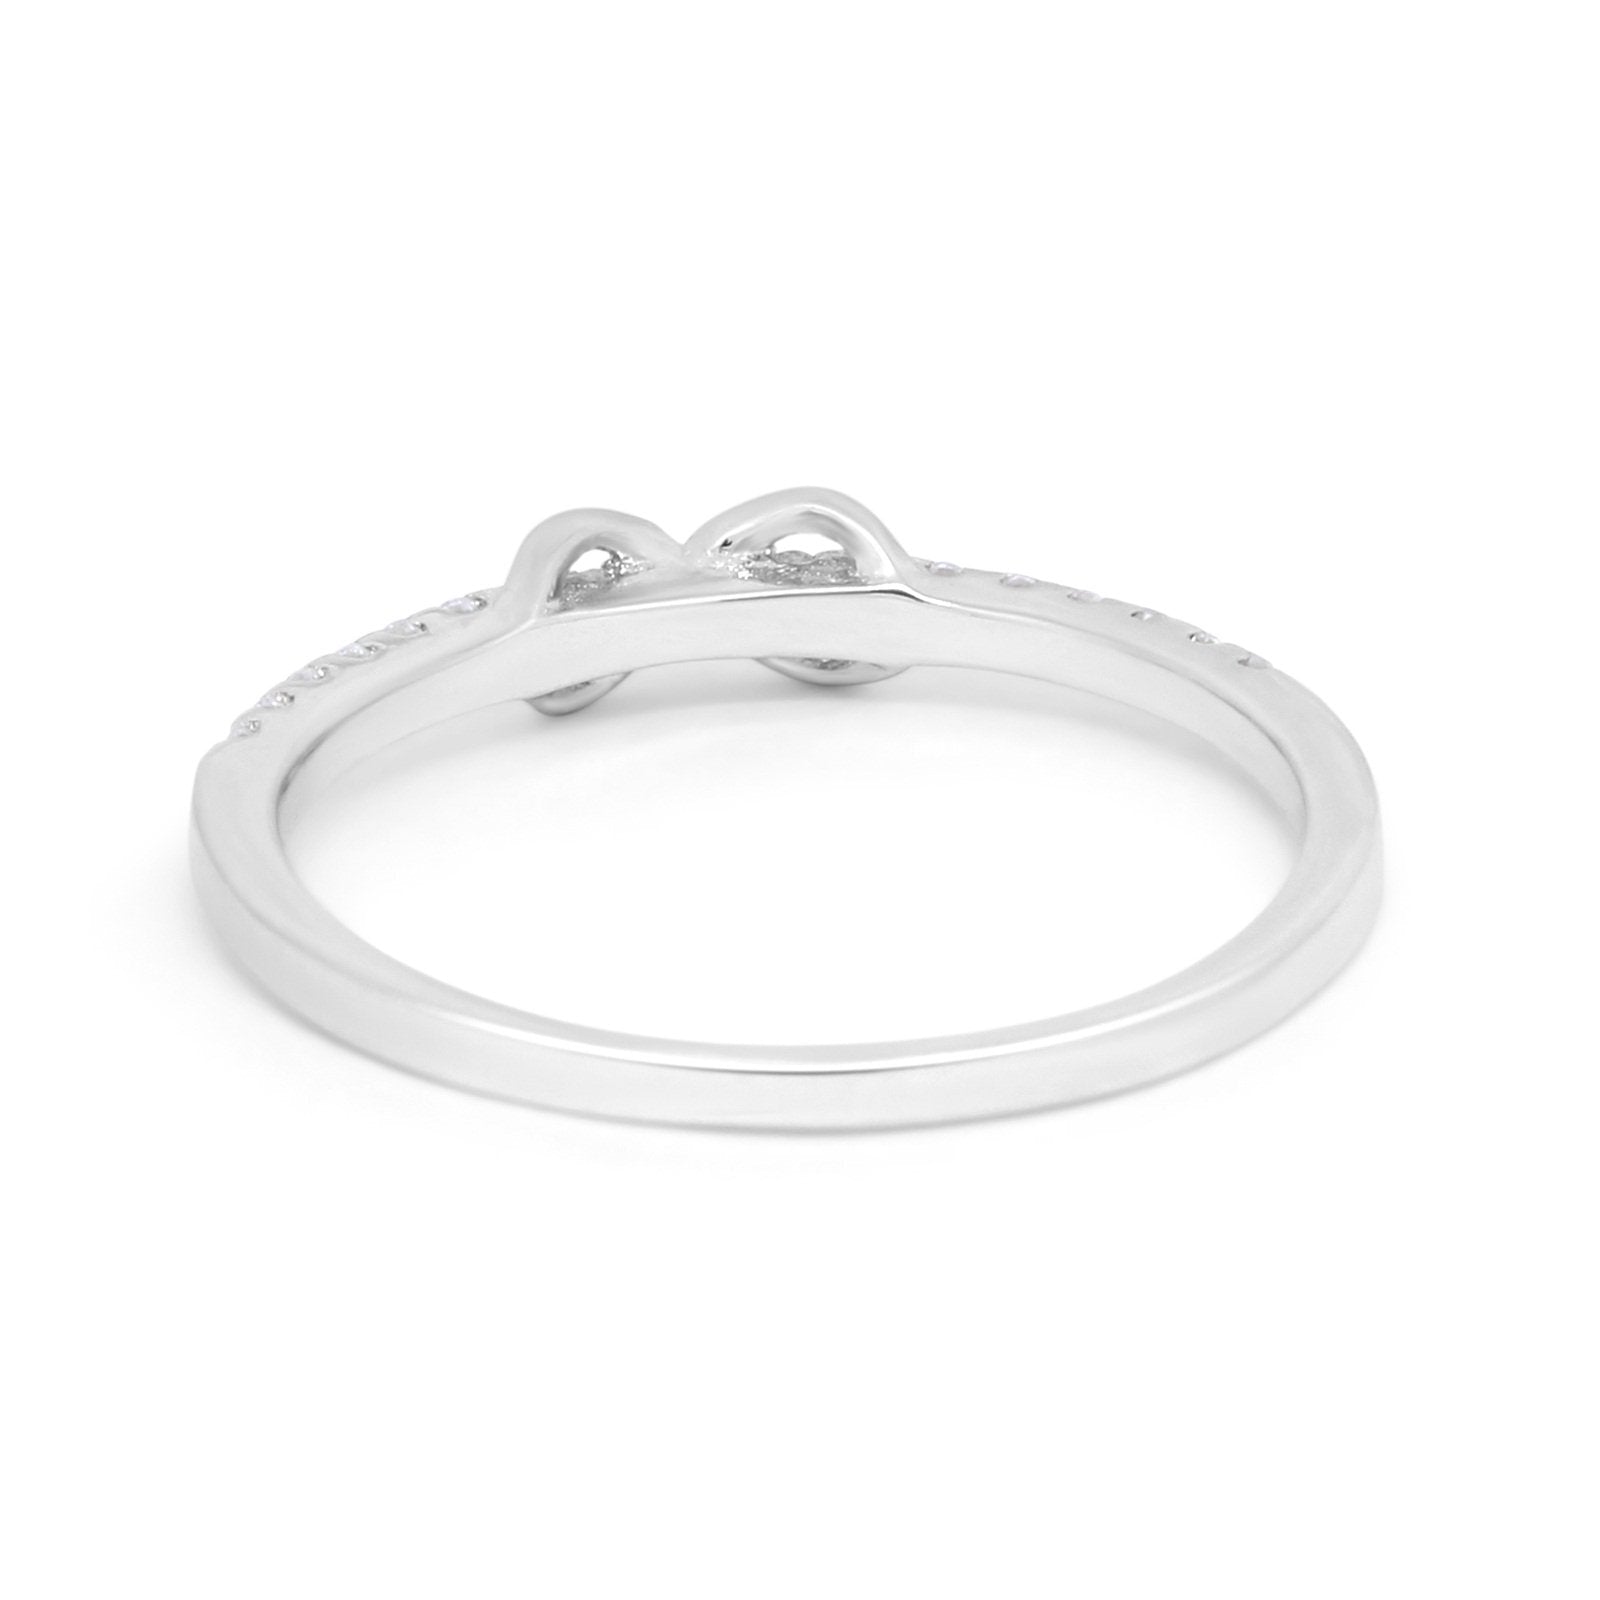 Petite Dainty Infinity Ring Round Simulated Cubic Zirconia 925 Sterling Silver